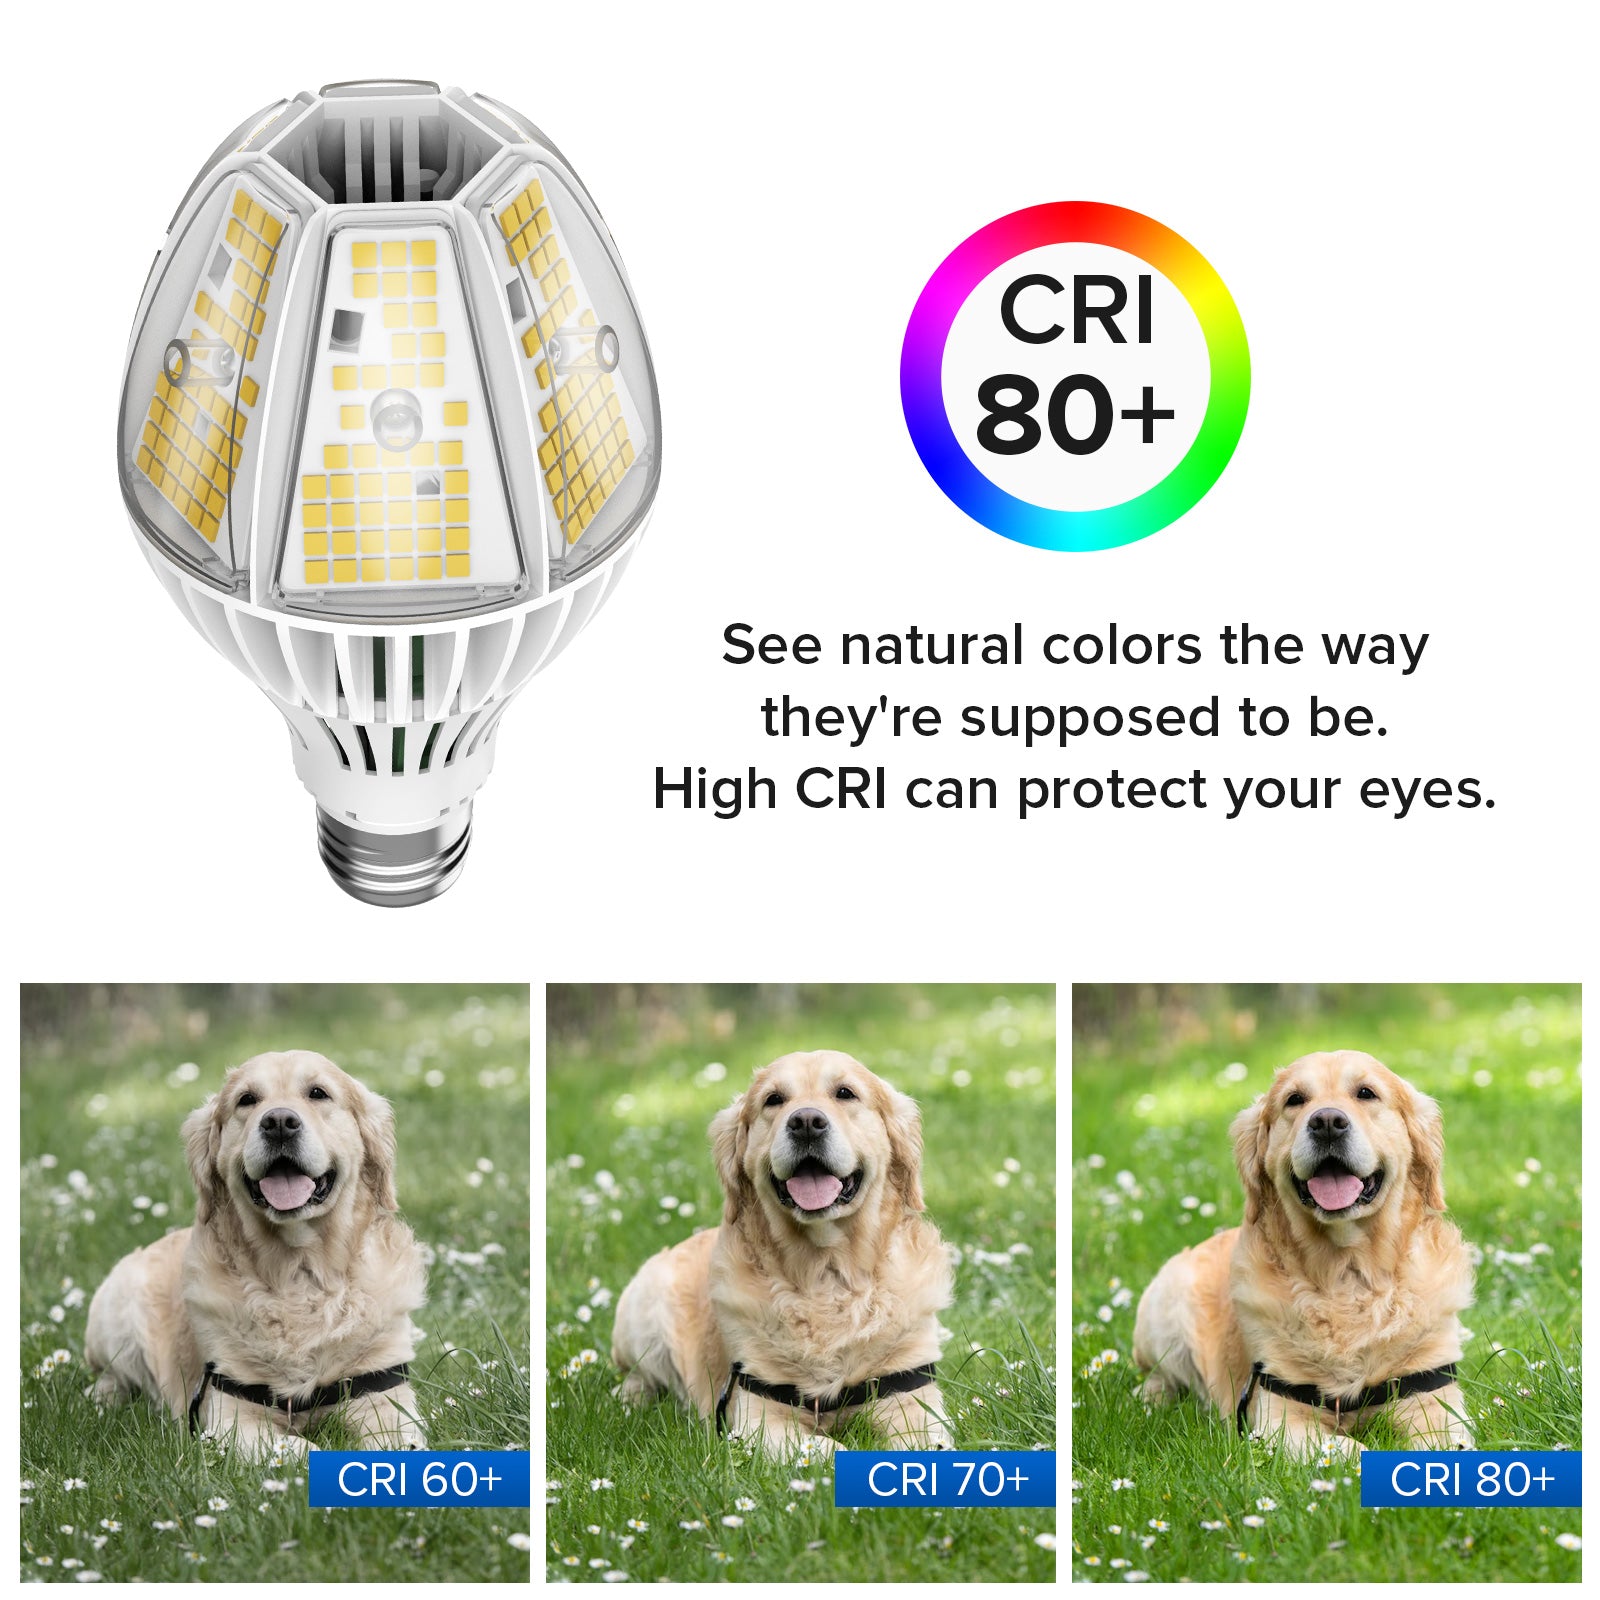 A21 60W LED 5000K Light Bulb (US ONLY) has 80+ CRI,protect your eyes.